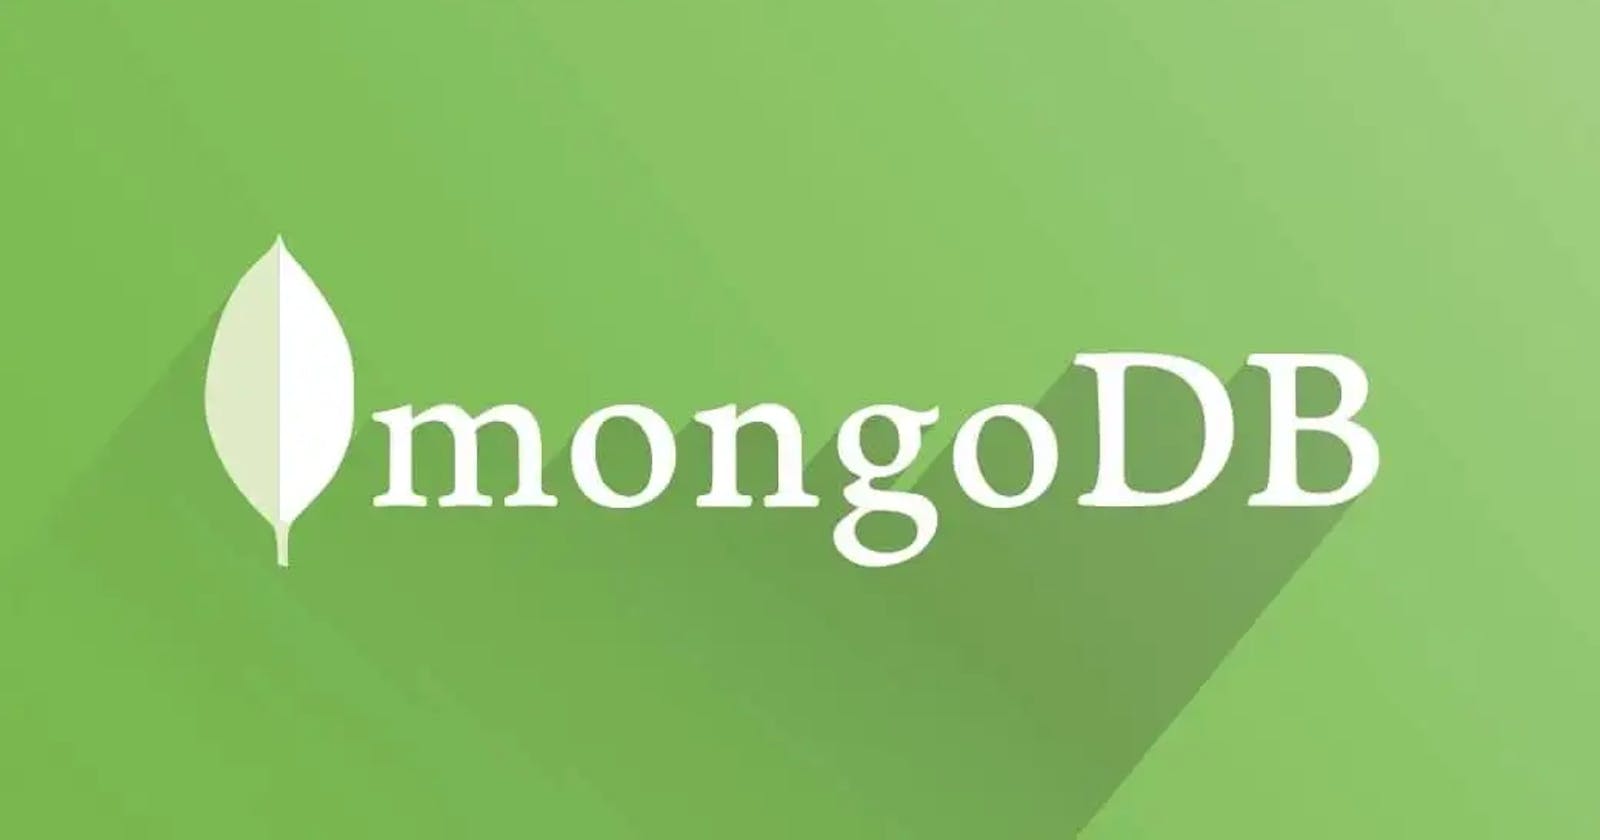 MongoDB: The Pros and Cons of Using a NoSQL Database